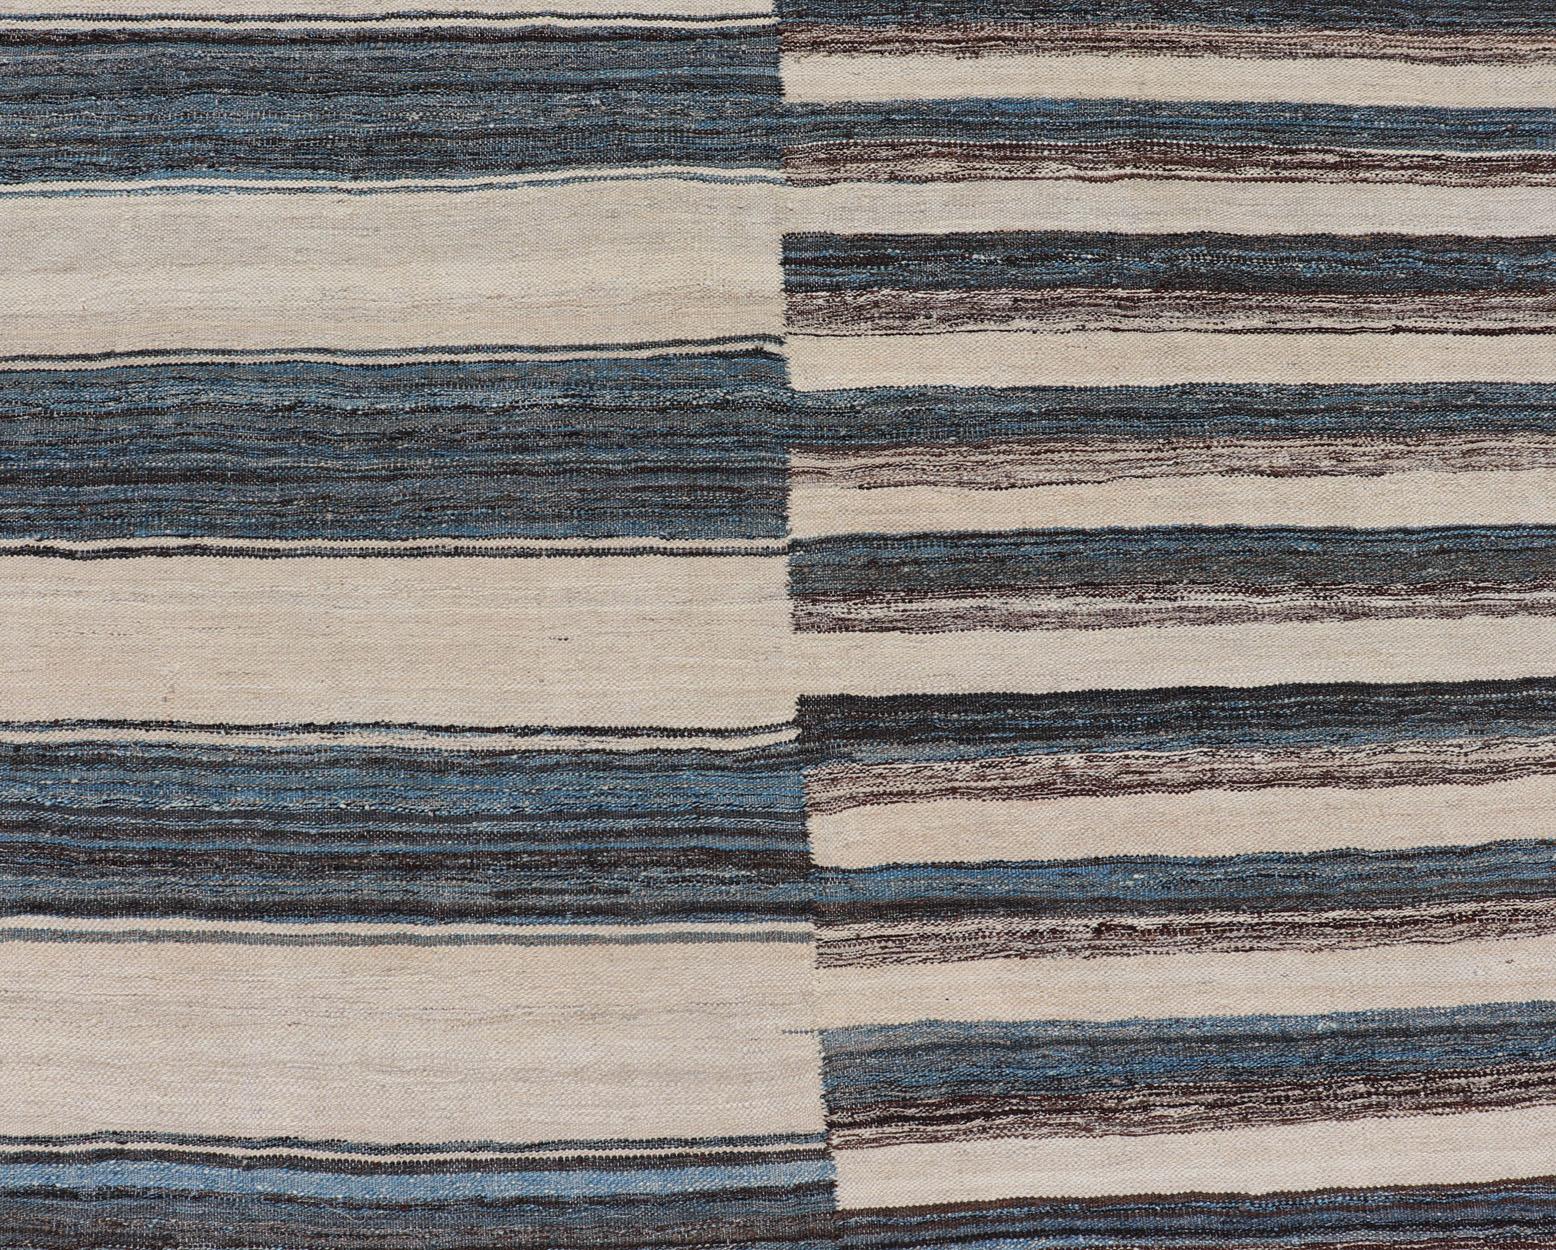 Sqaure Flat-Weave Kilim Rug with Classic Stripe Design in Blue, Cream, Brown In Excellent Condition For Sale In Atlanta, GA